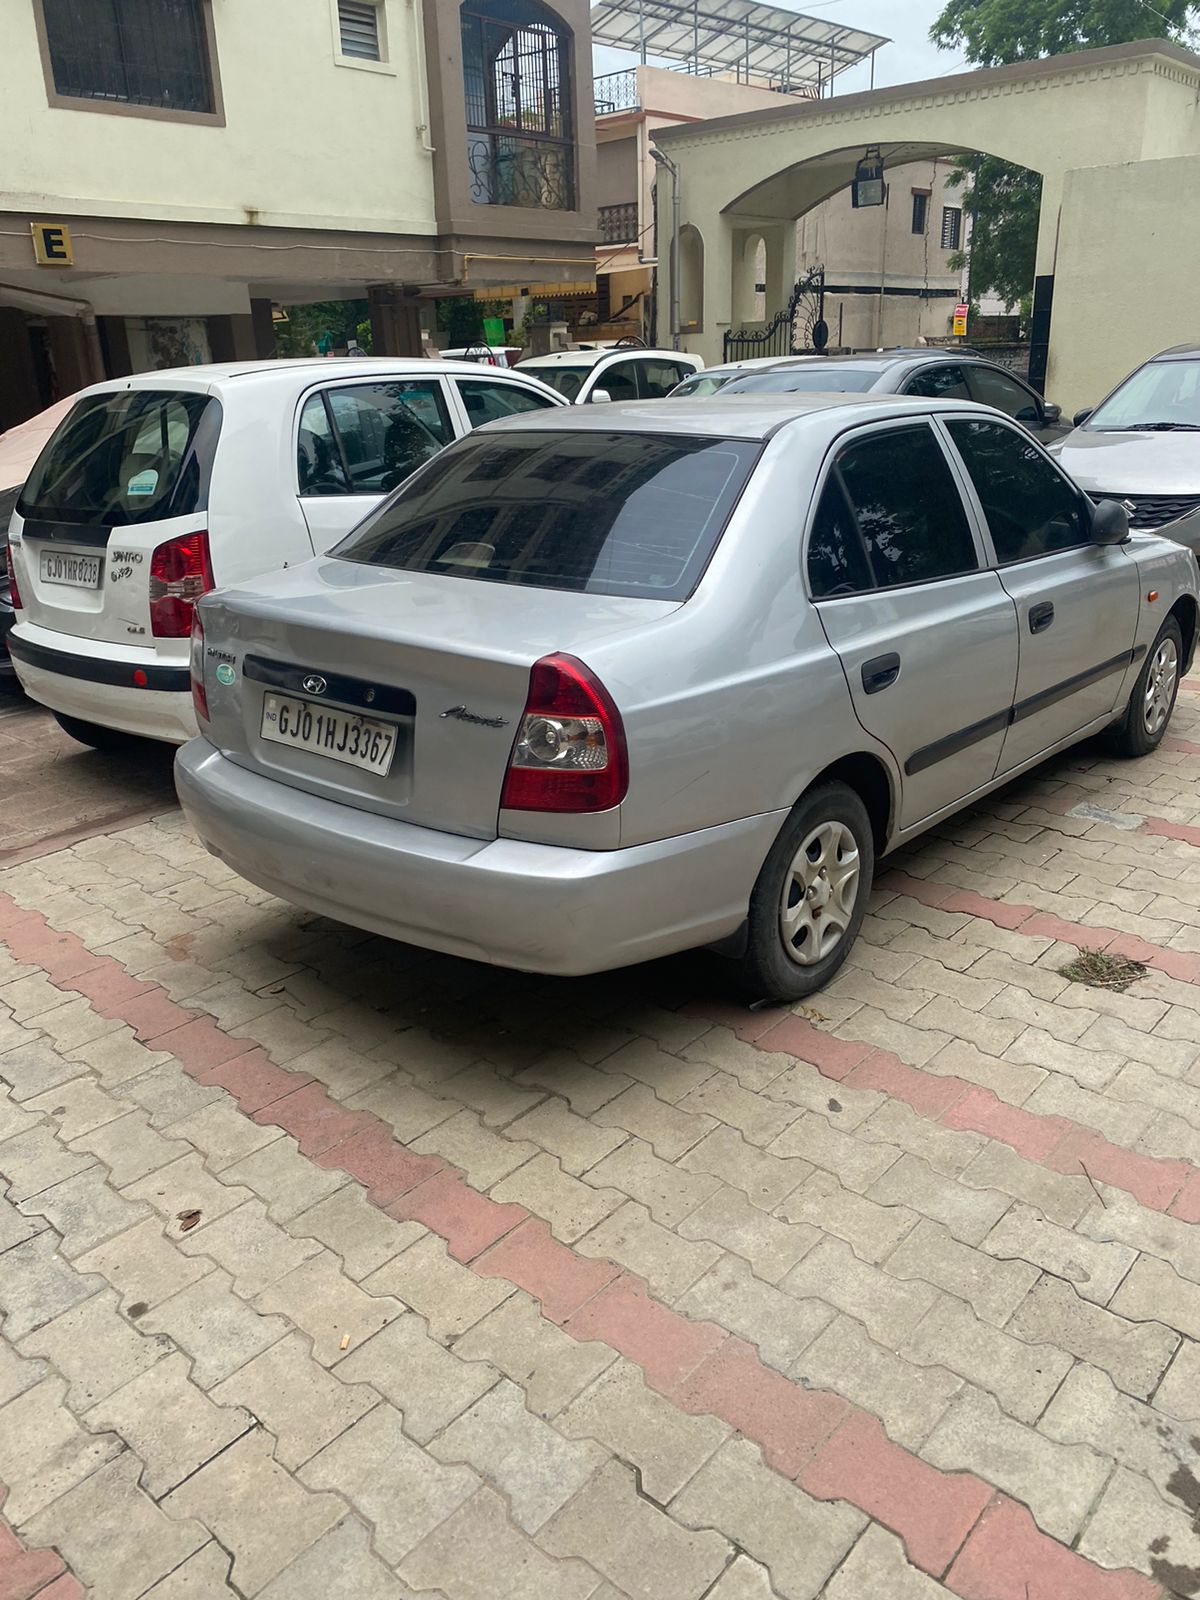 Details View - Hyundai Accent  photos - reseller,reseller marketplace,advetising your products,reseller bazzar,resellerbazzar.in,india's classified site,Hyundai Accent, used Hyundai Accent  , old Hyundai Accent  , old Hyundai Accent  in Ahmedabad, Hyundai Accent  in Ahmedabad